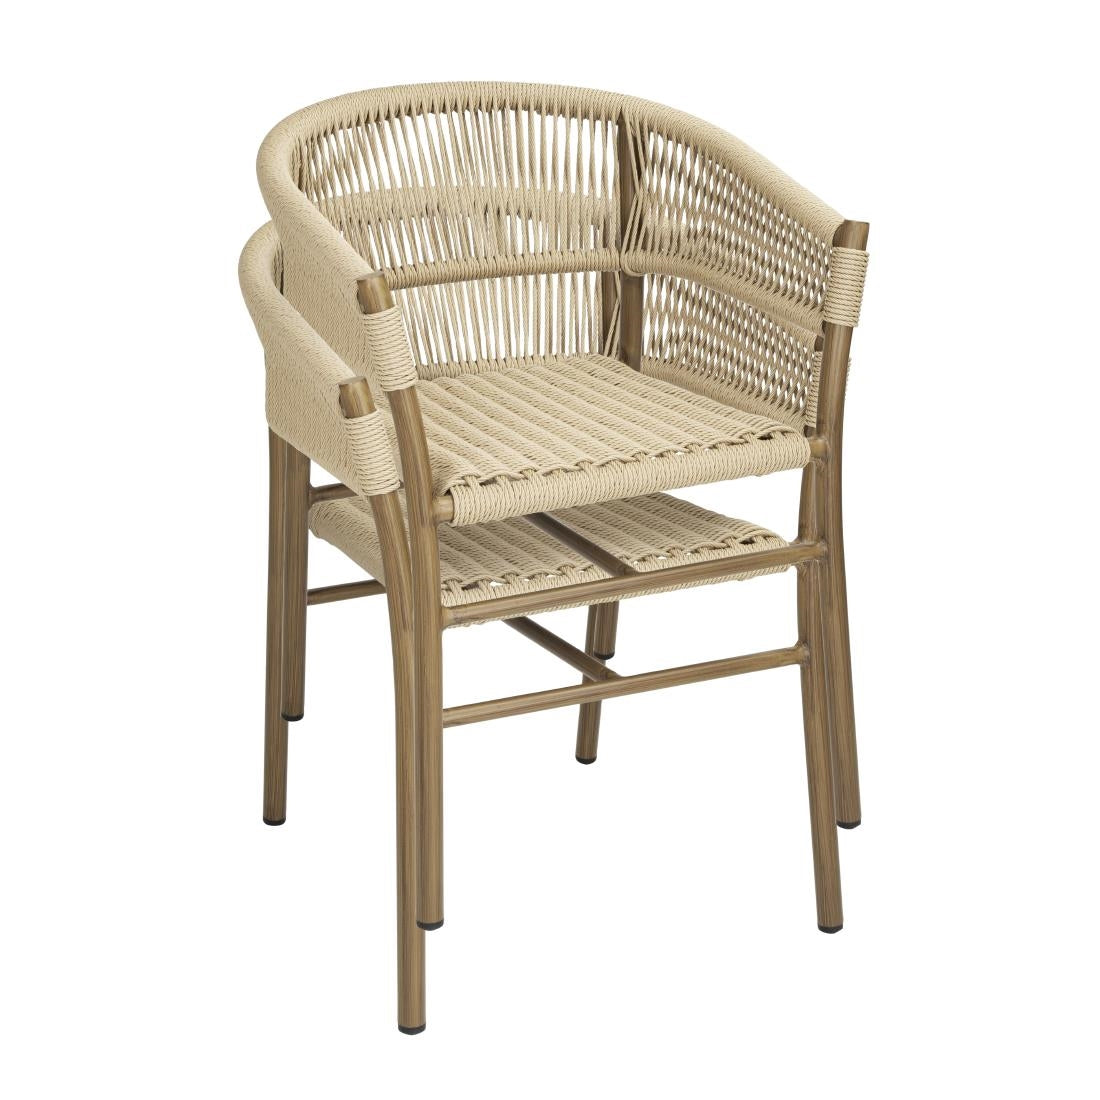 FU532 Bolero Florence Natural Rope Twist Wicker Chairs (Pack of 2)